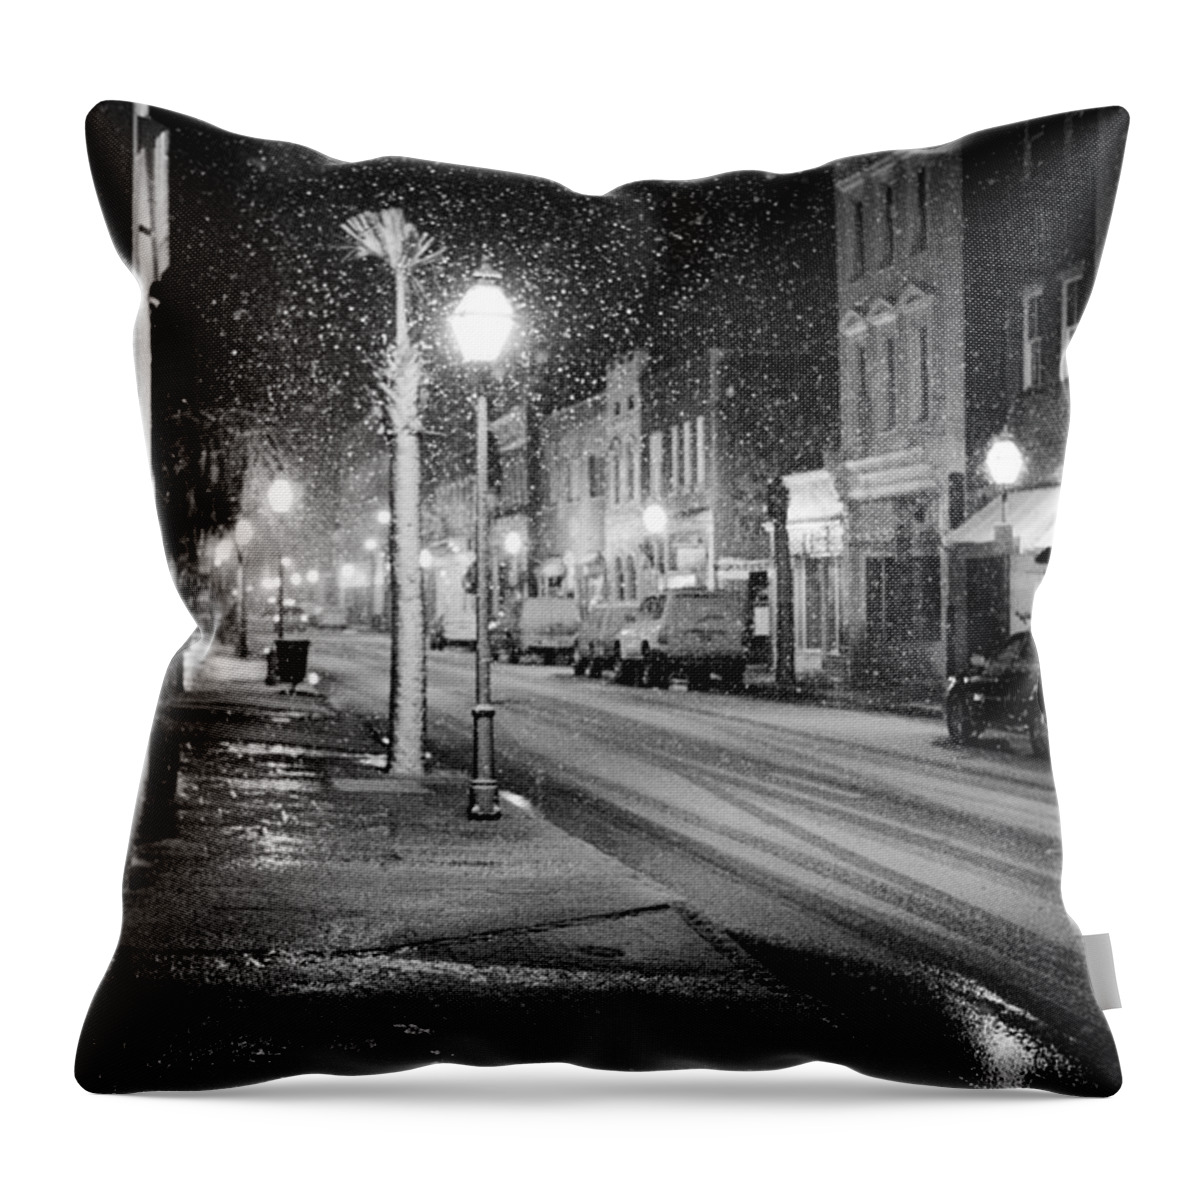 Snowing Throw Pillow featuring the photograph King Street Charleston Snow by Dustin K Ryan